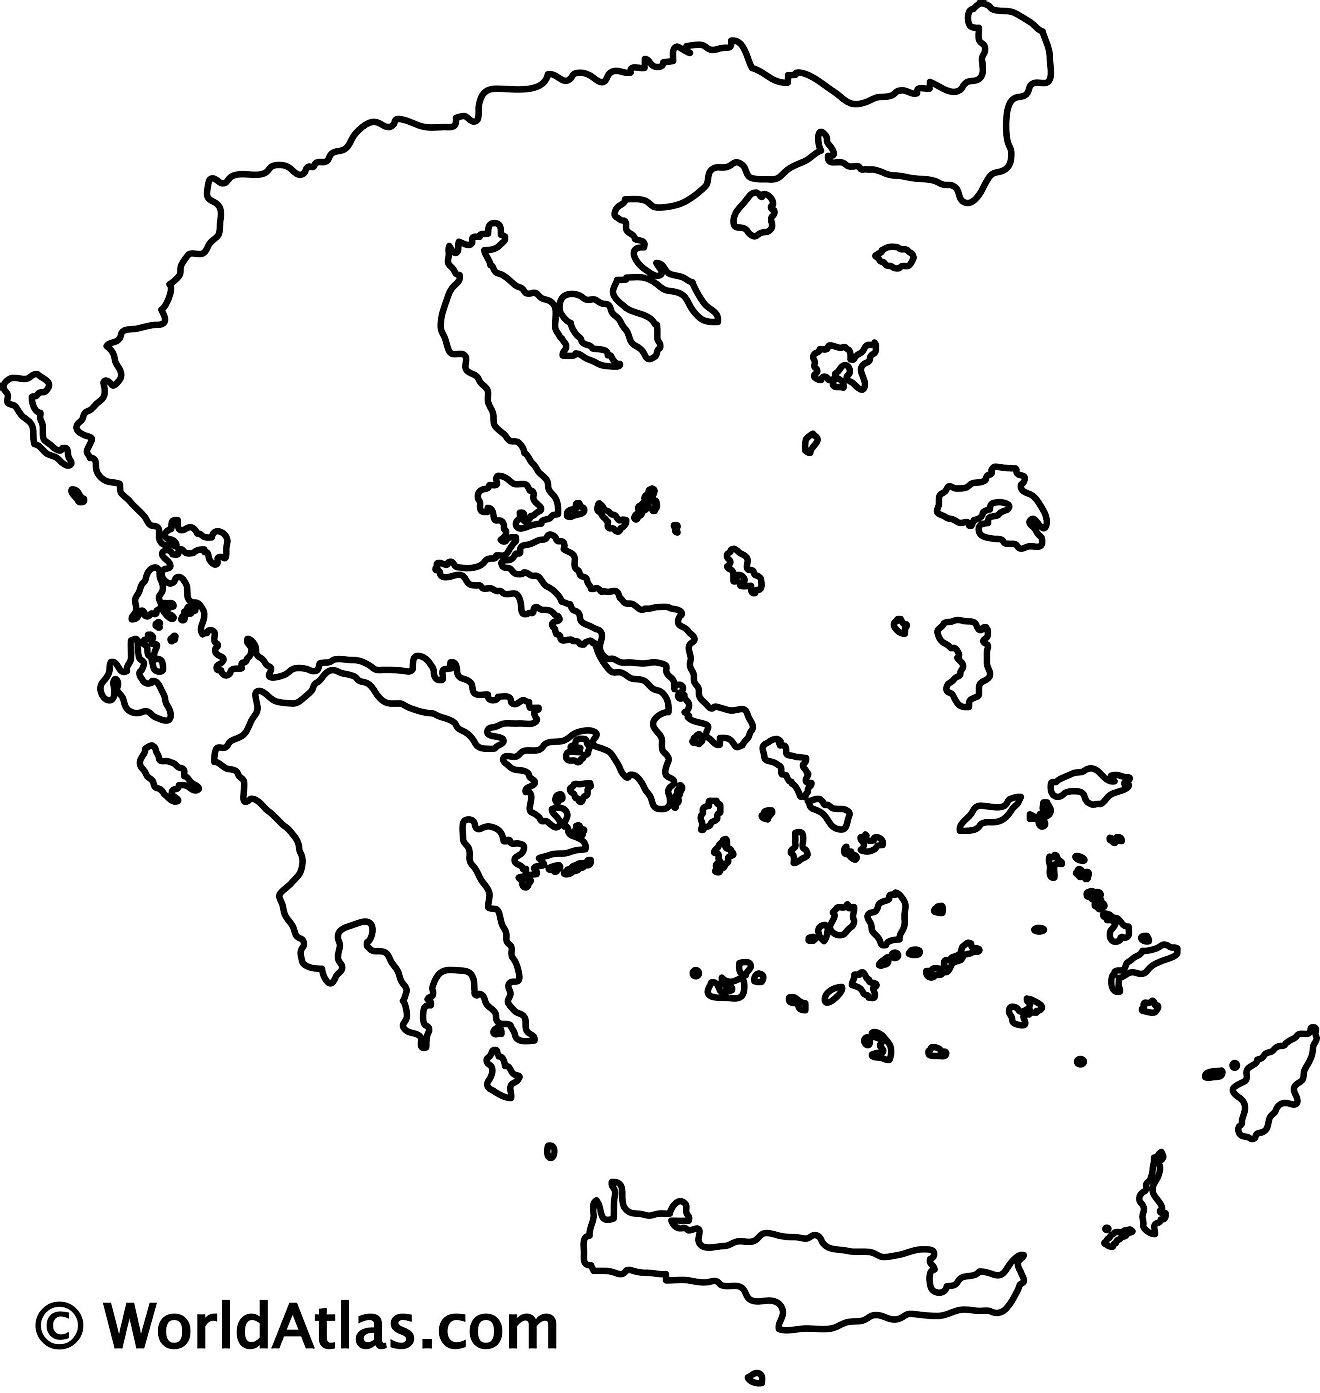 Blank Outline Map of Greece